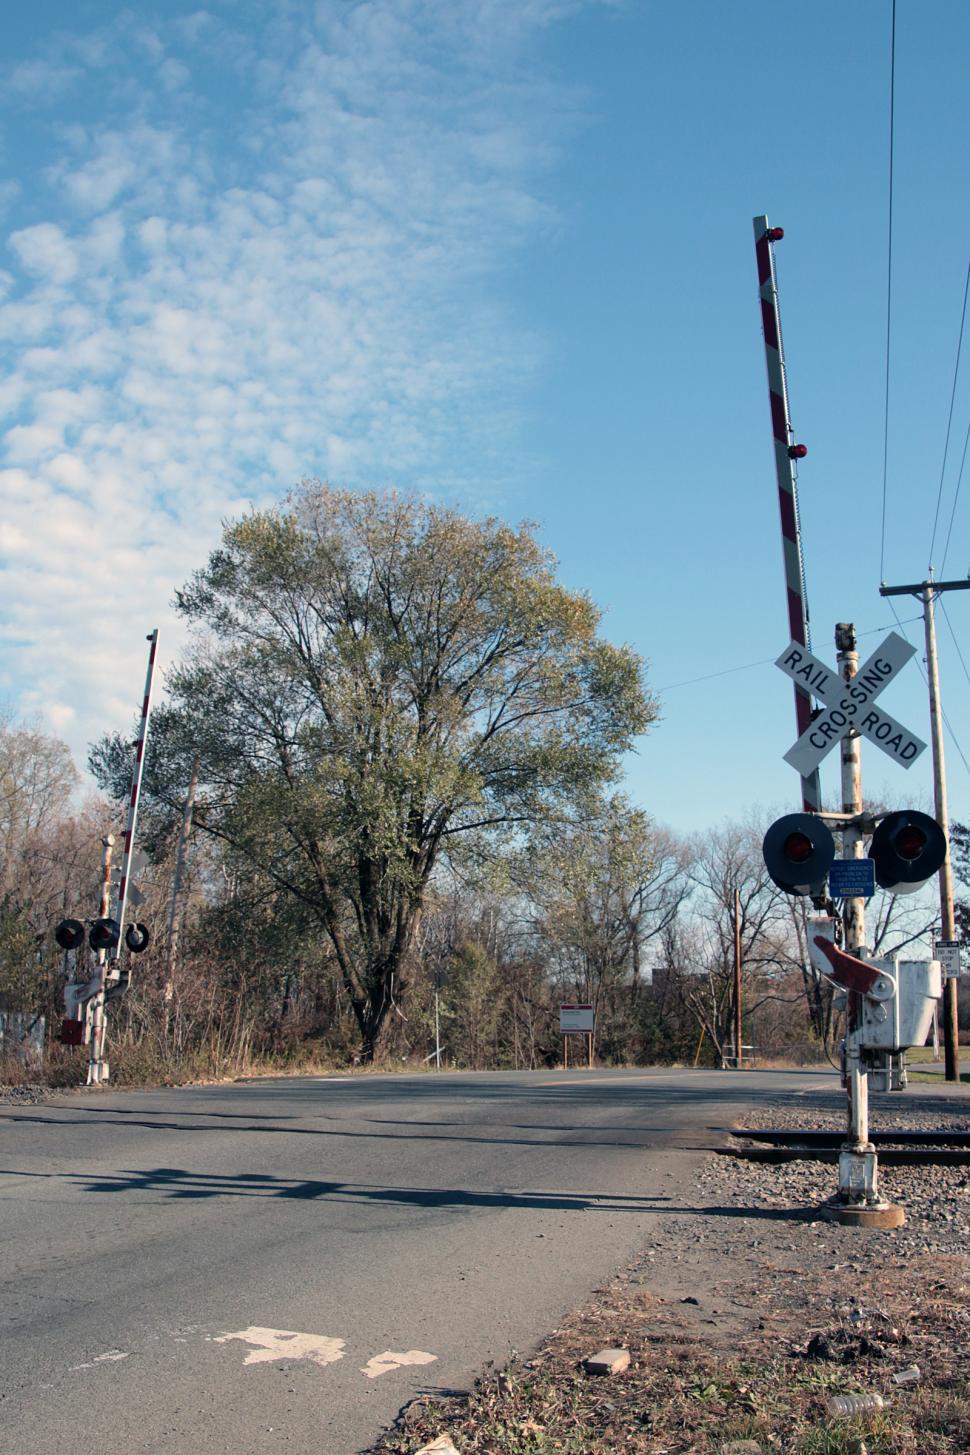 Free Image of Two Lane Road and Railroad Crossing 